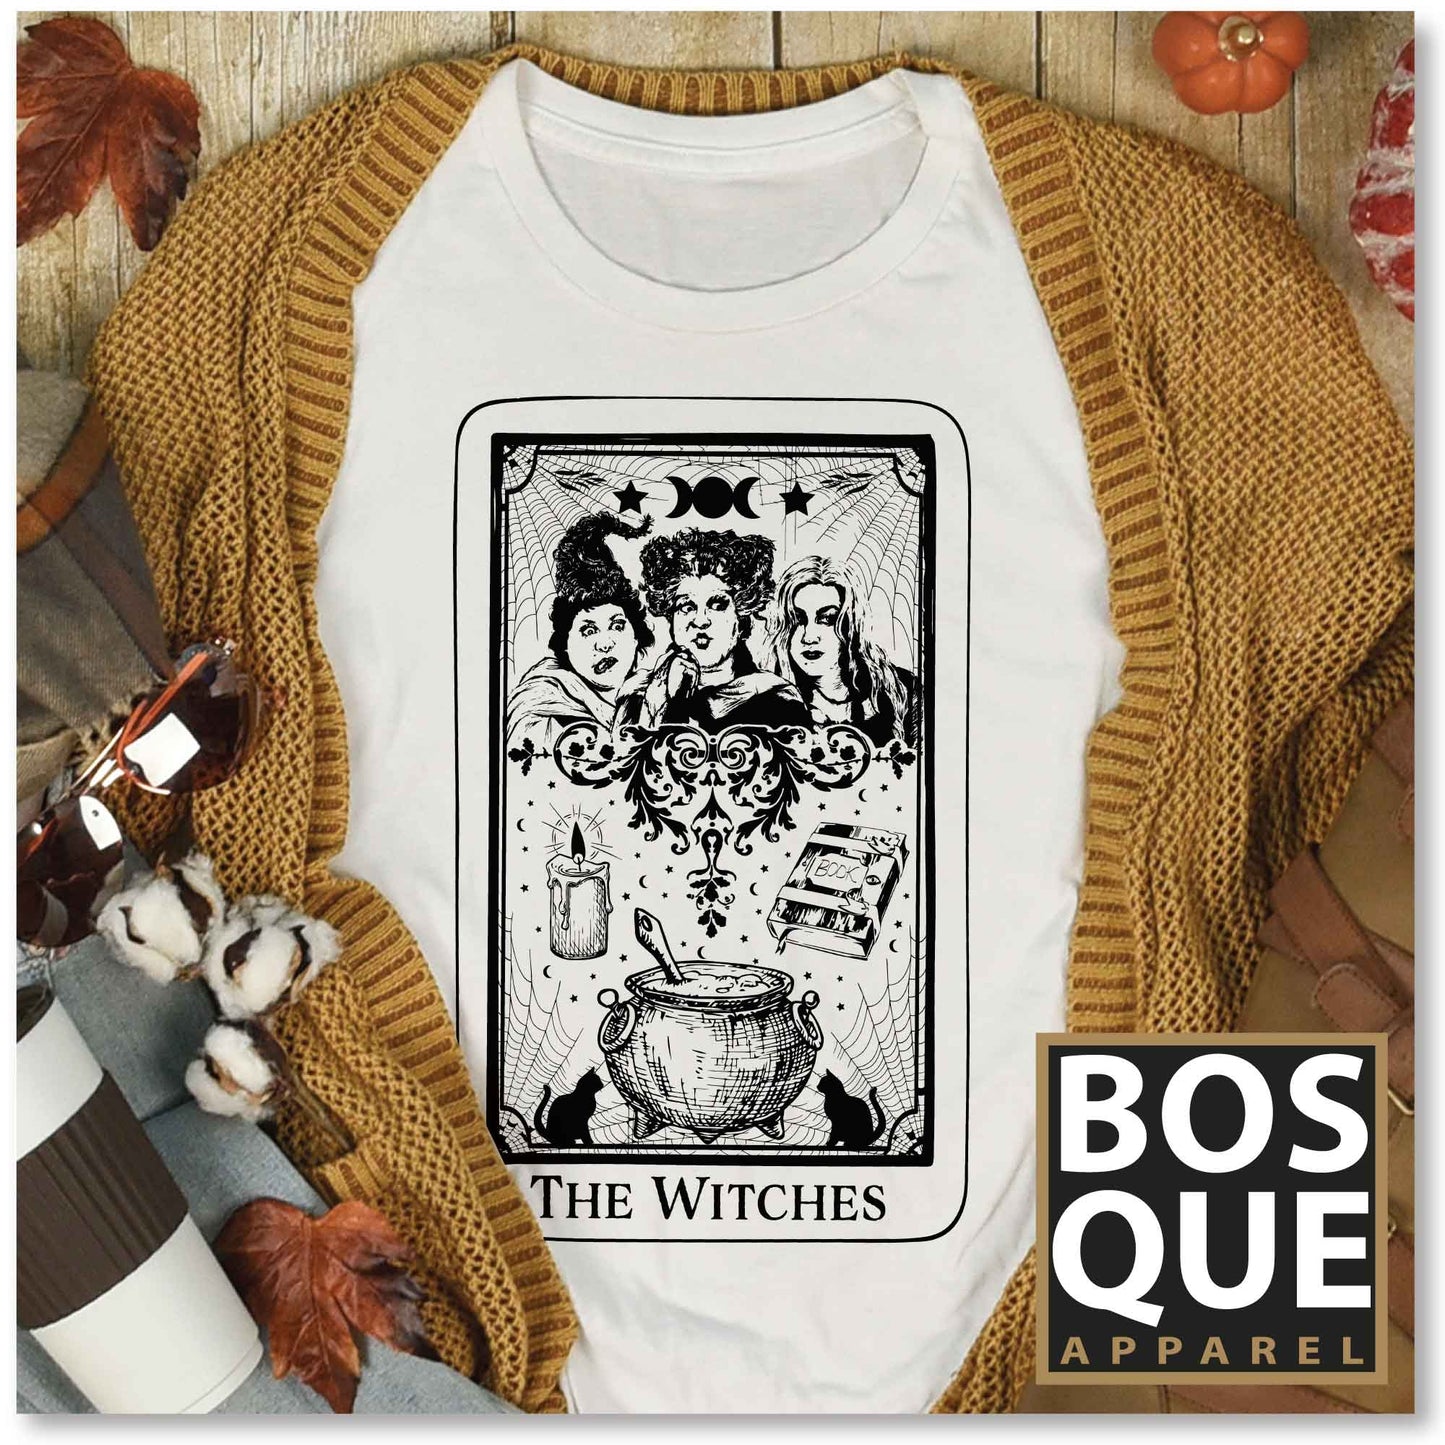 The Witches Tarot style Halloween Unisex t-shirt